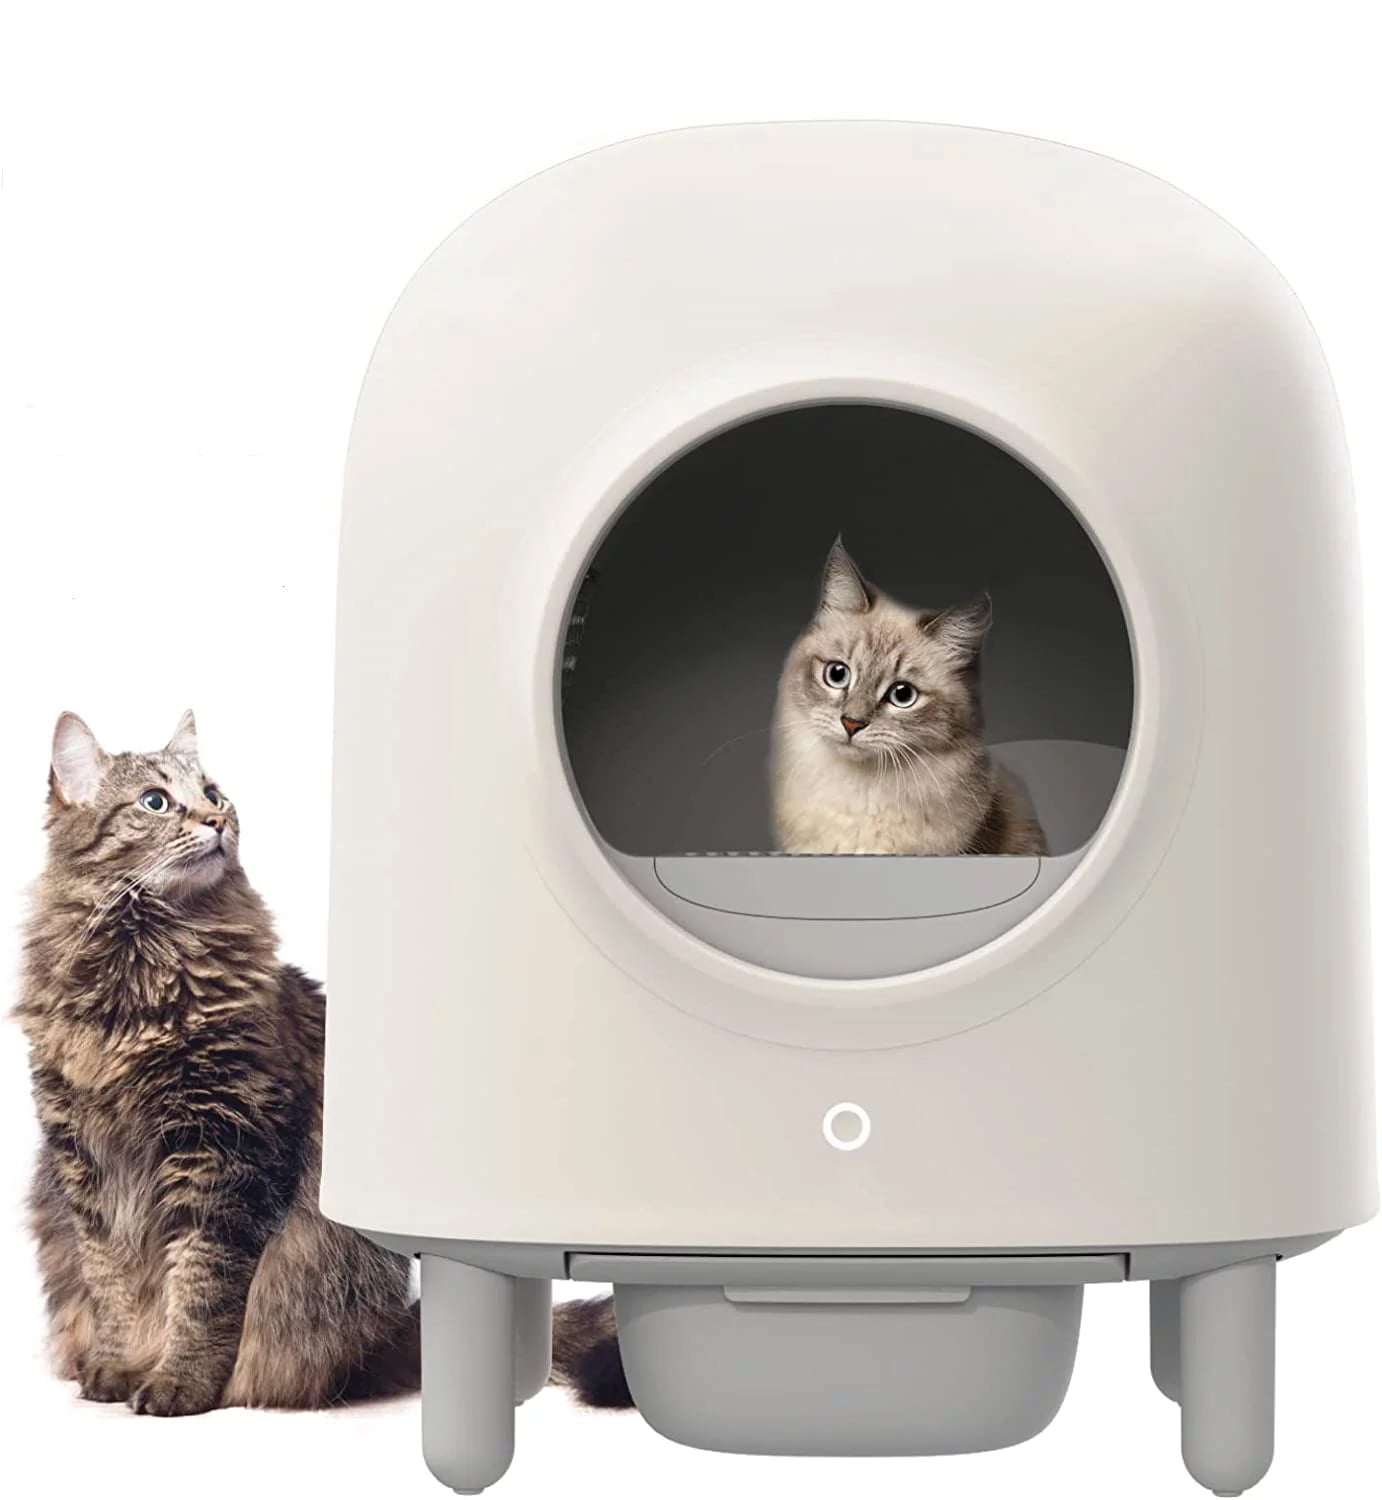 Ib Kammer samtale HHO LOVE Automatic Cat Litter Box, APP Remote Control Cat Litter Robot with  Self Cleaning, Alerts, Odor Suppression, Disassembly for Multiple Cats -  Walmart.com